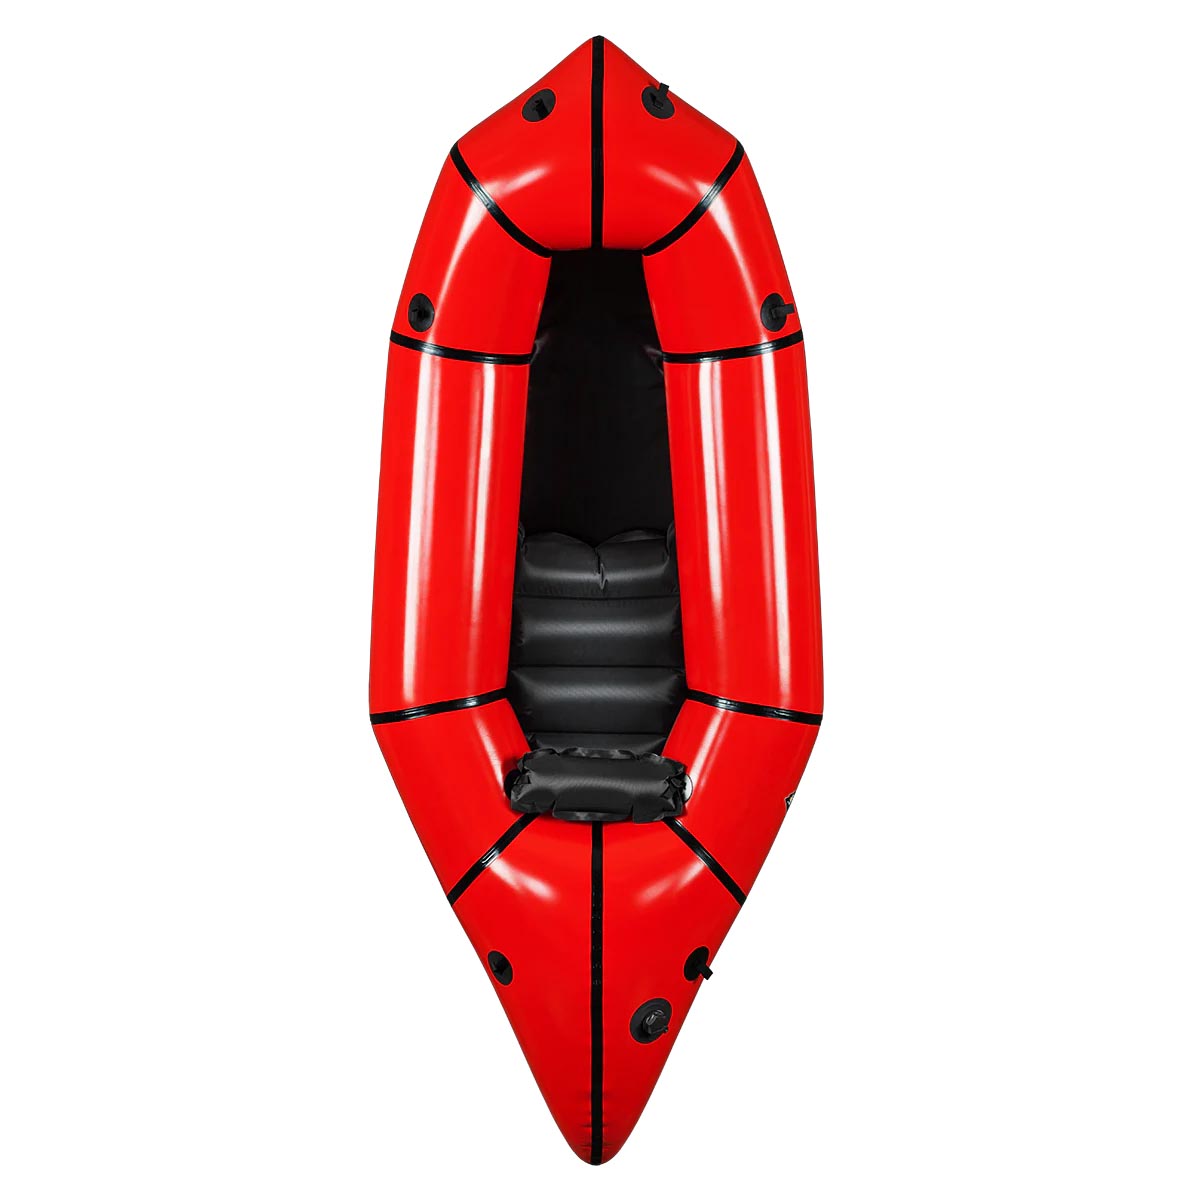 Featuring the Classic with Open Deck pack raft manufactured by Alpacka shown here from one angle.